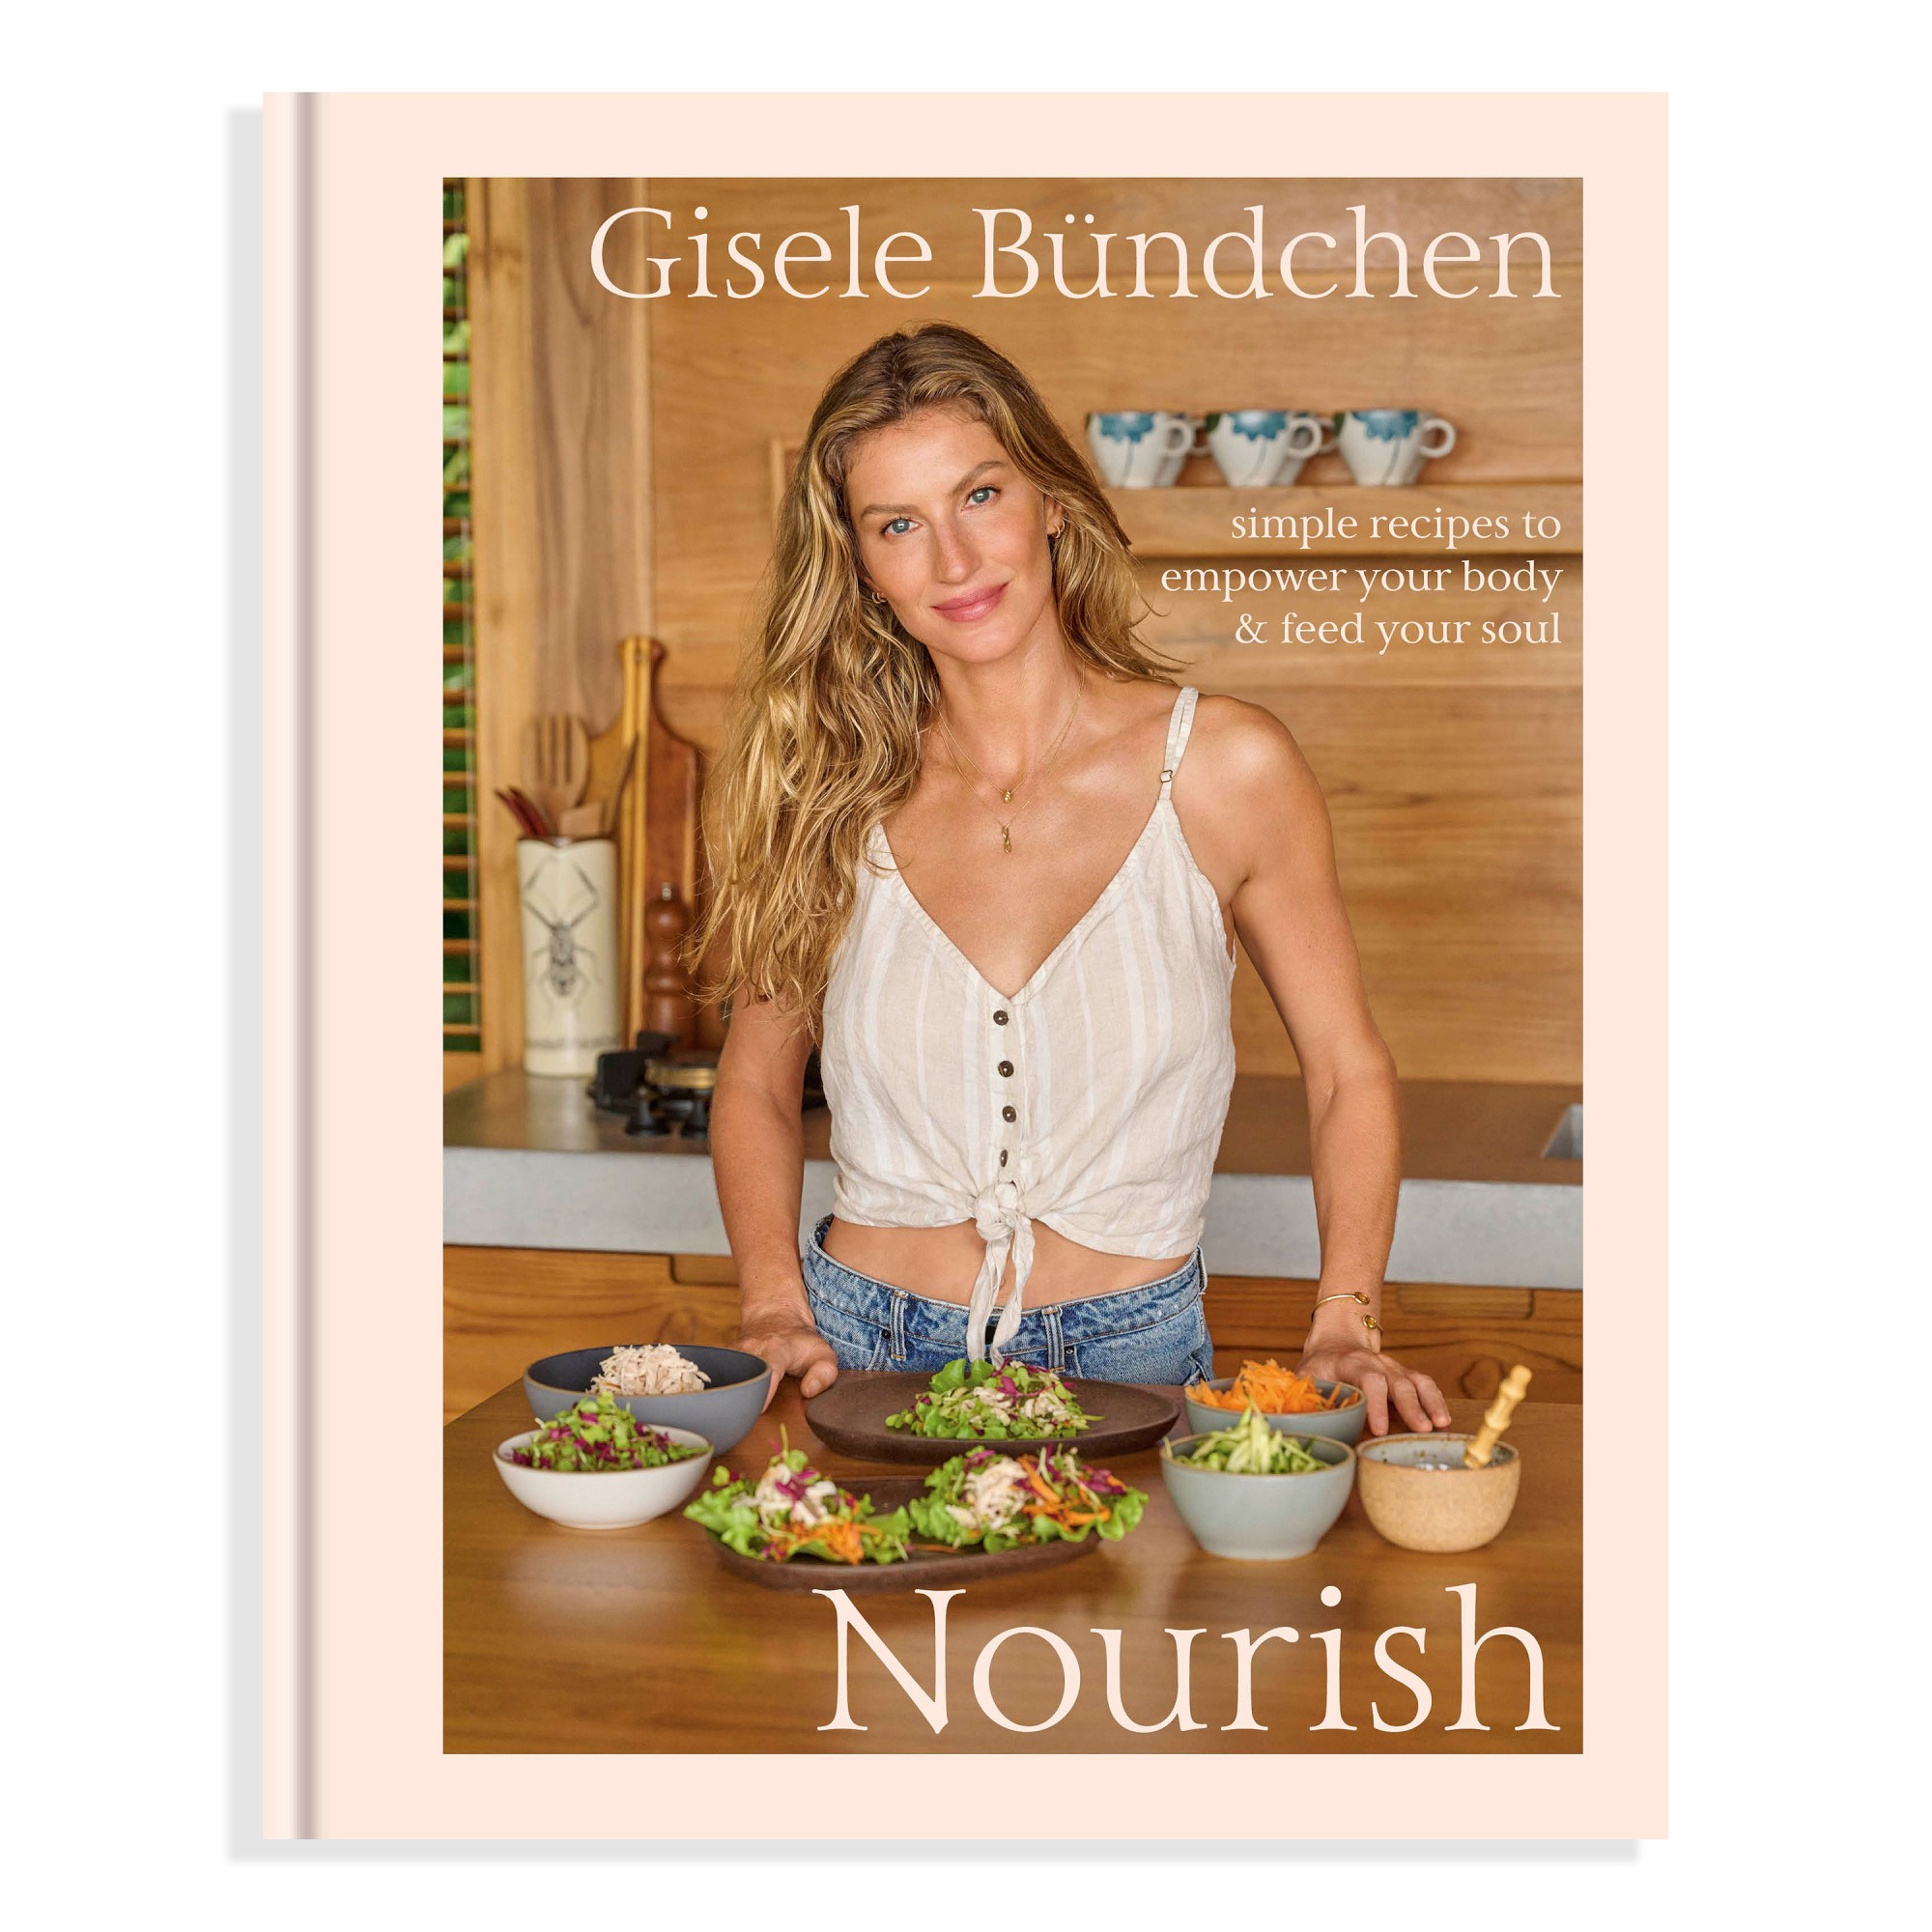 Gisele Bundchen: Nourish, Simple Recipes to Empower Your Body and Feed Your Soul